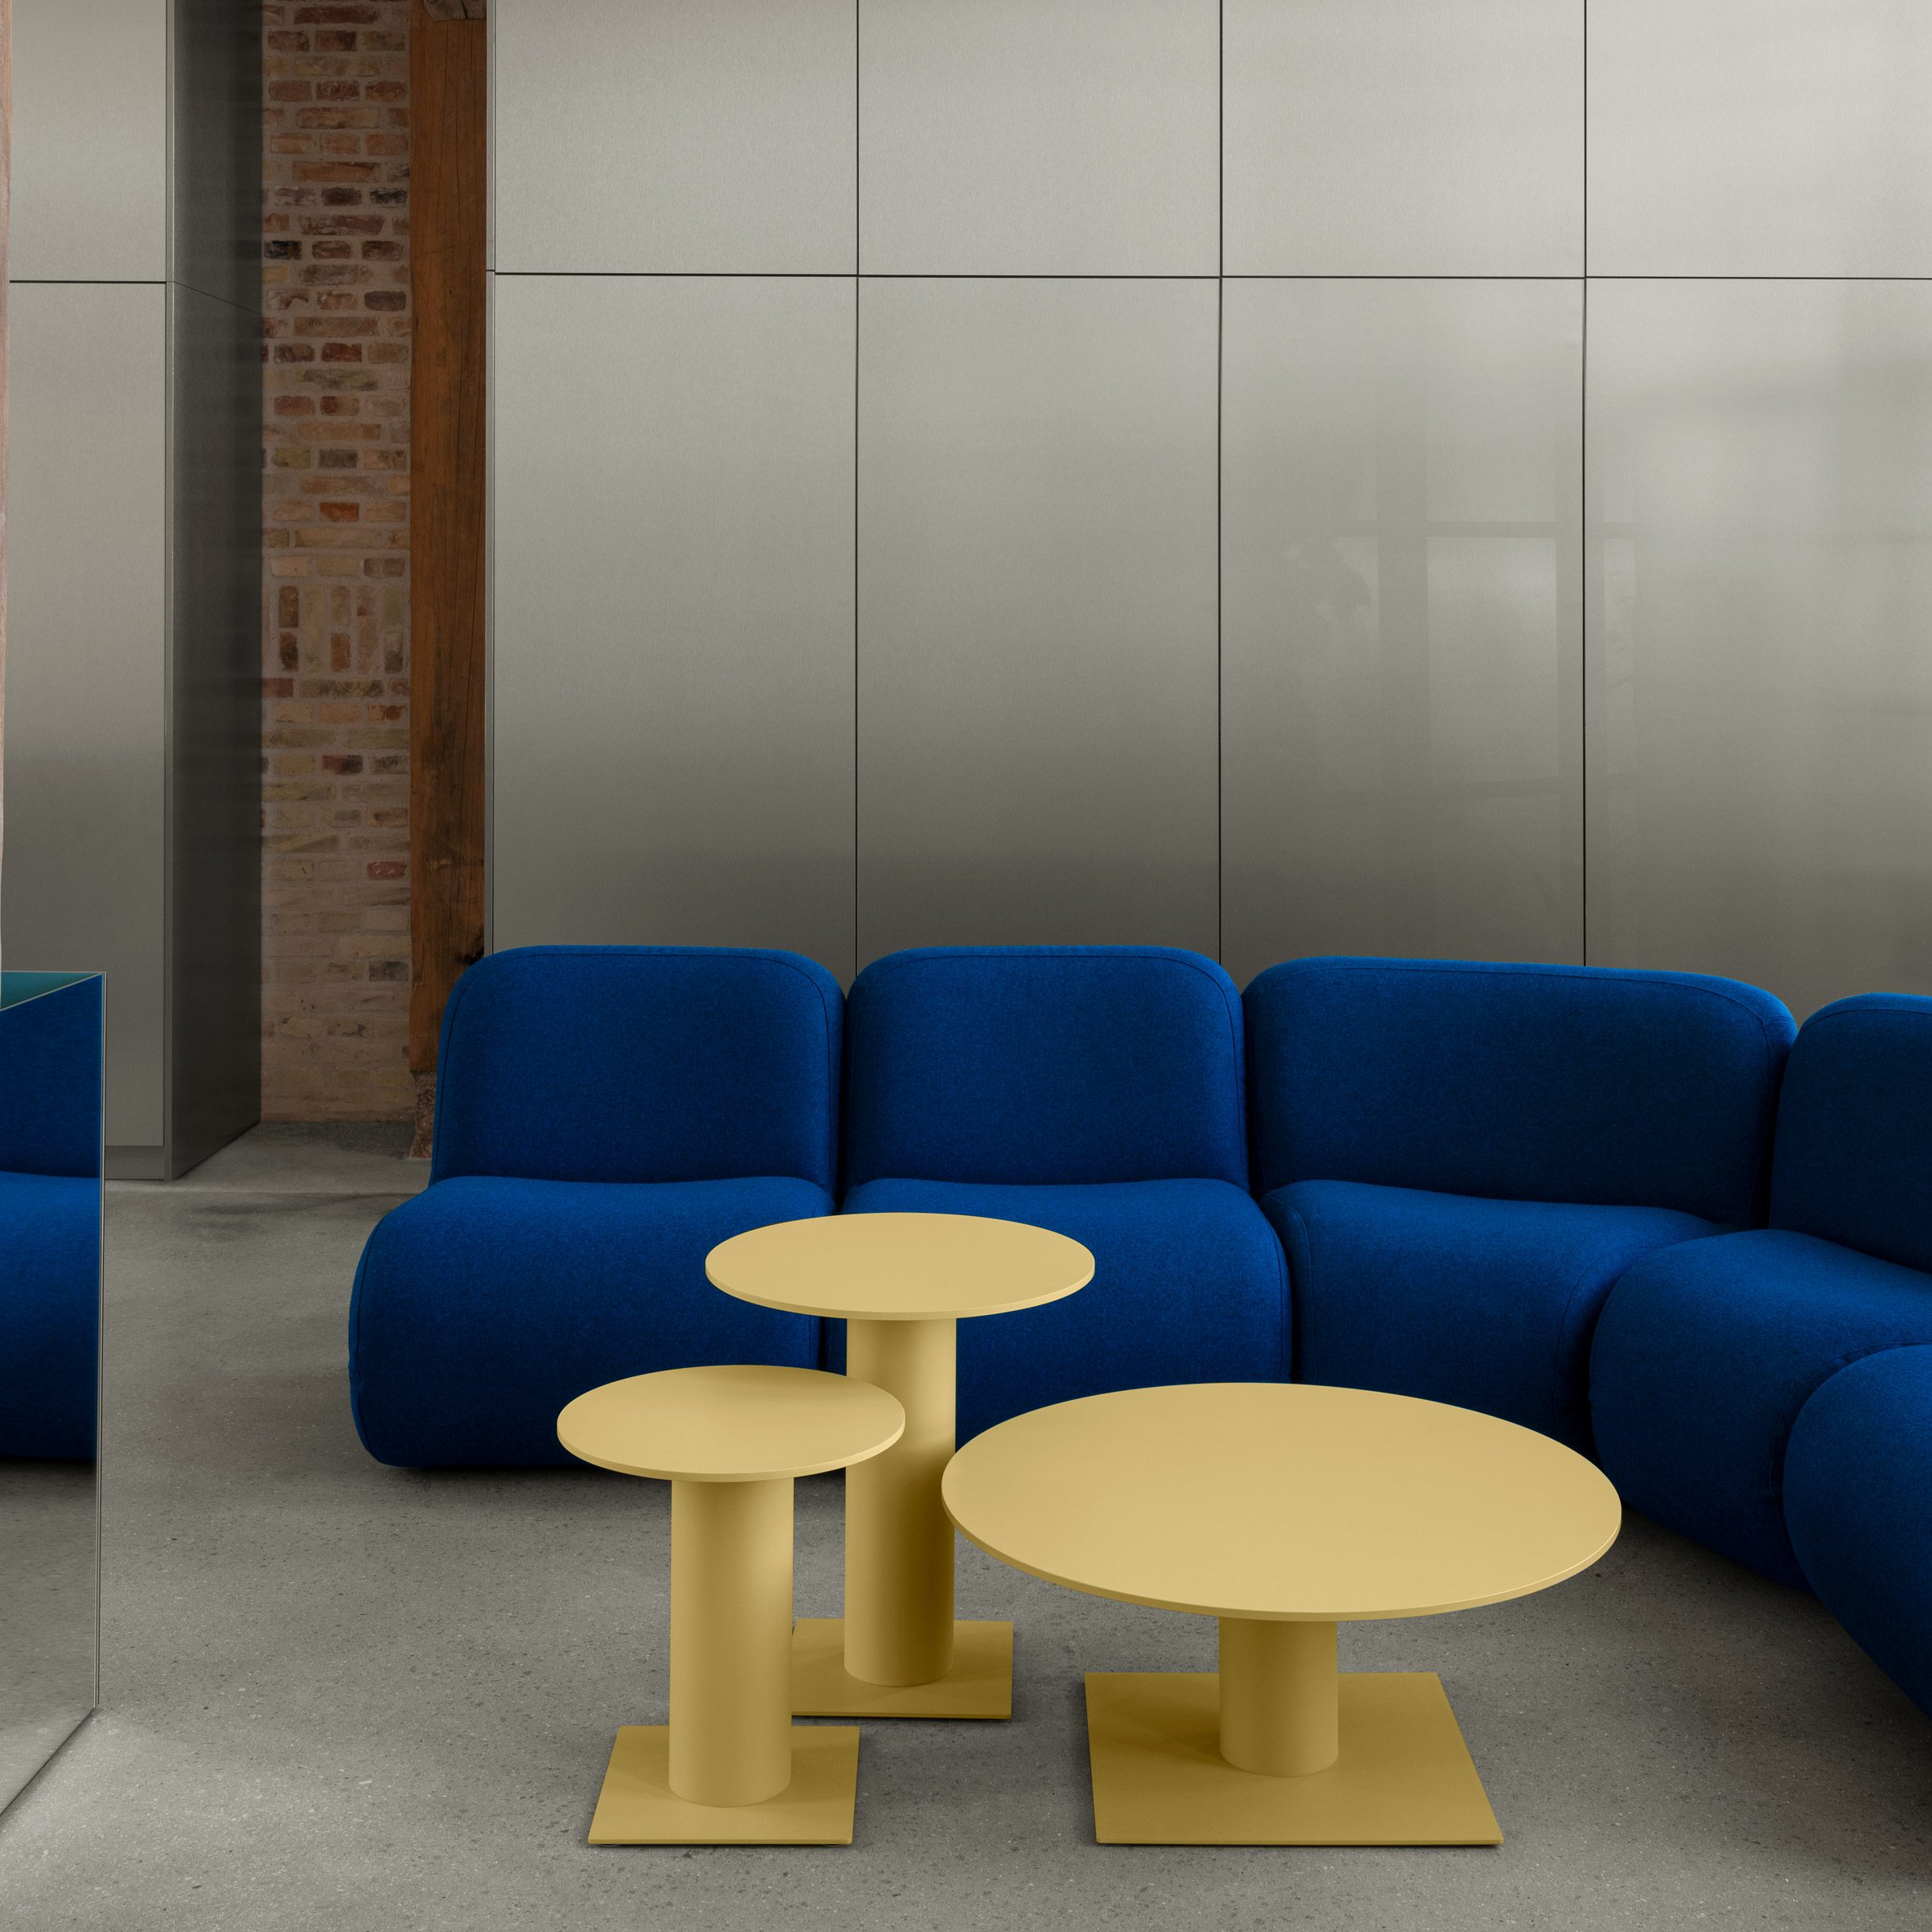 Blue sofa and yellow tables